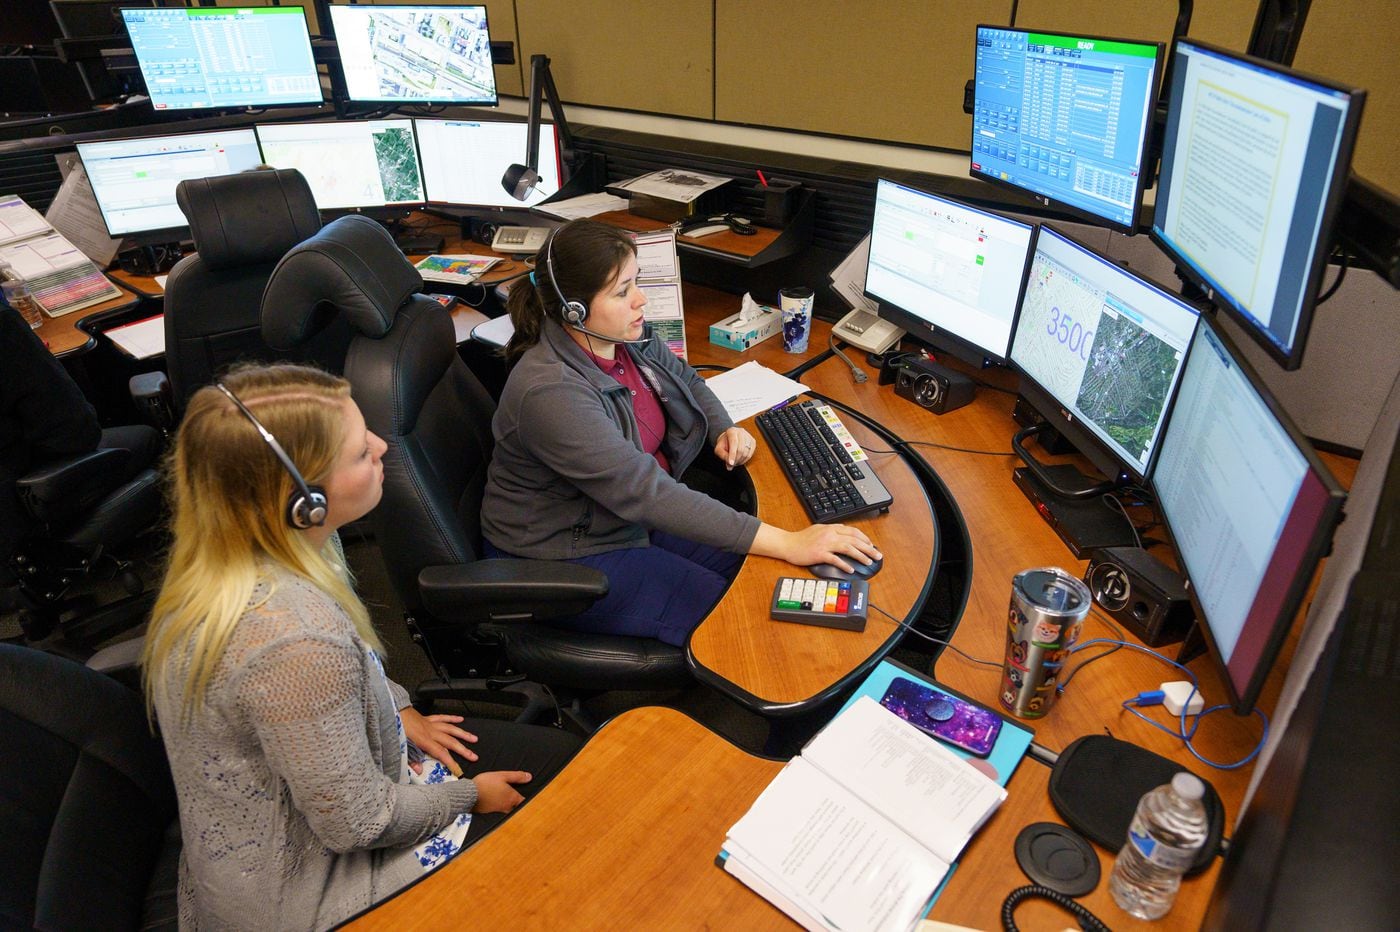 Montgomery County has a shortage of 911 dispatchers. They